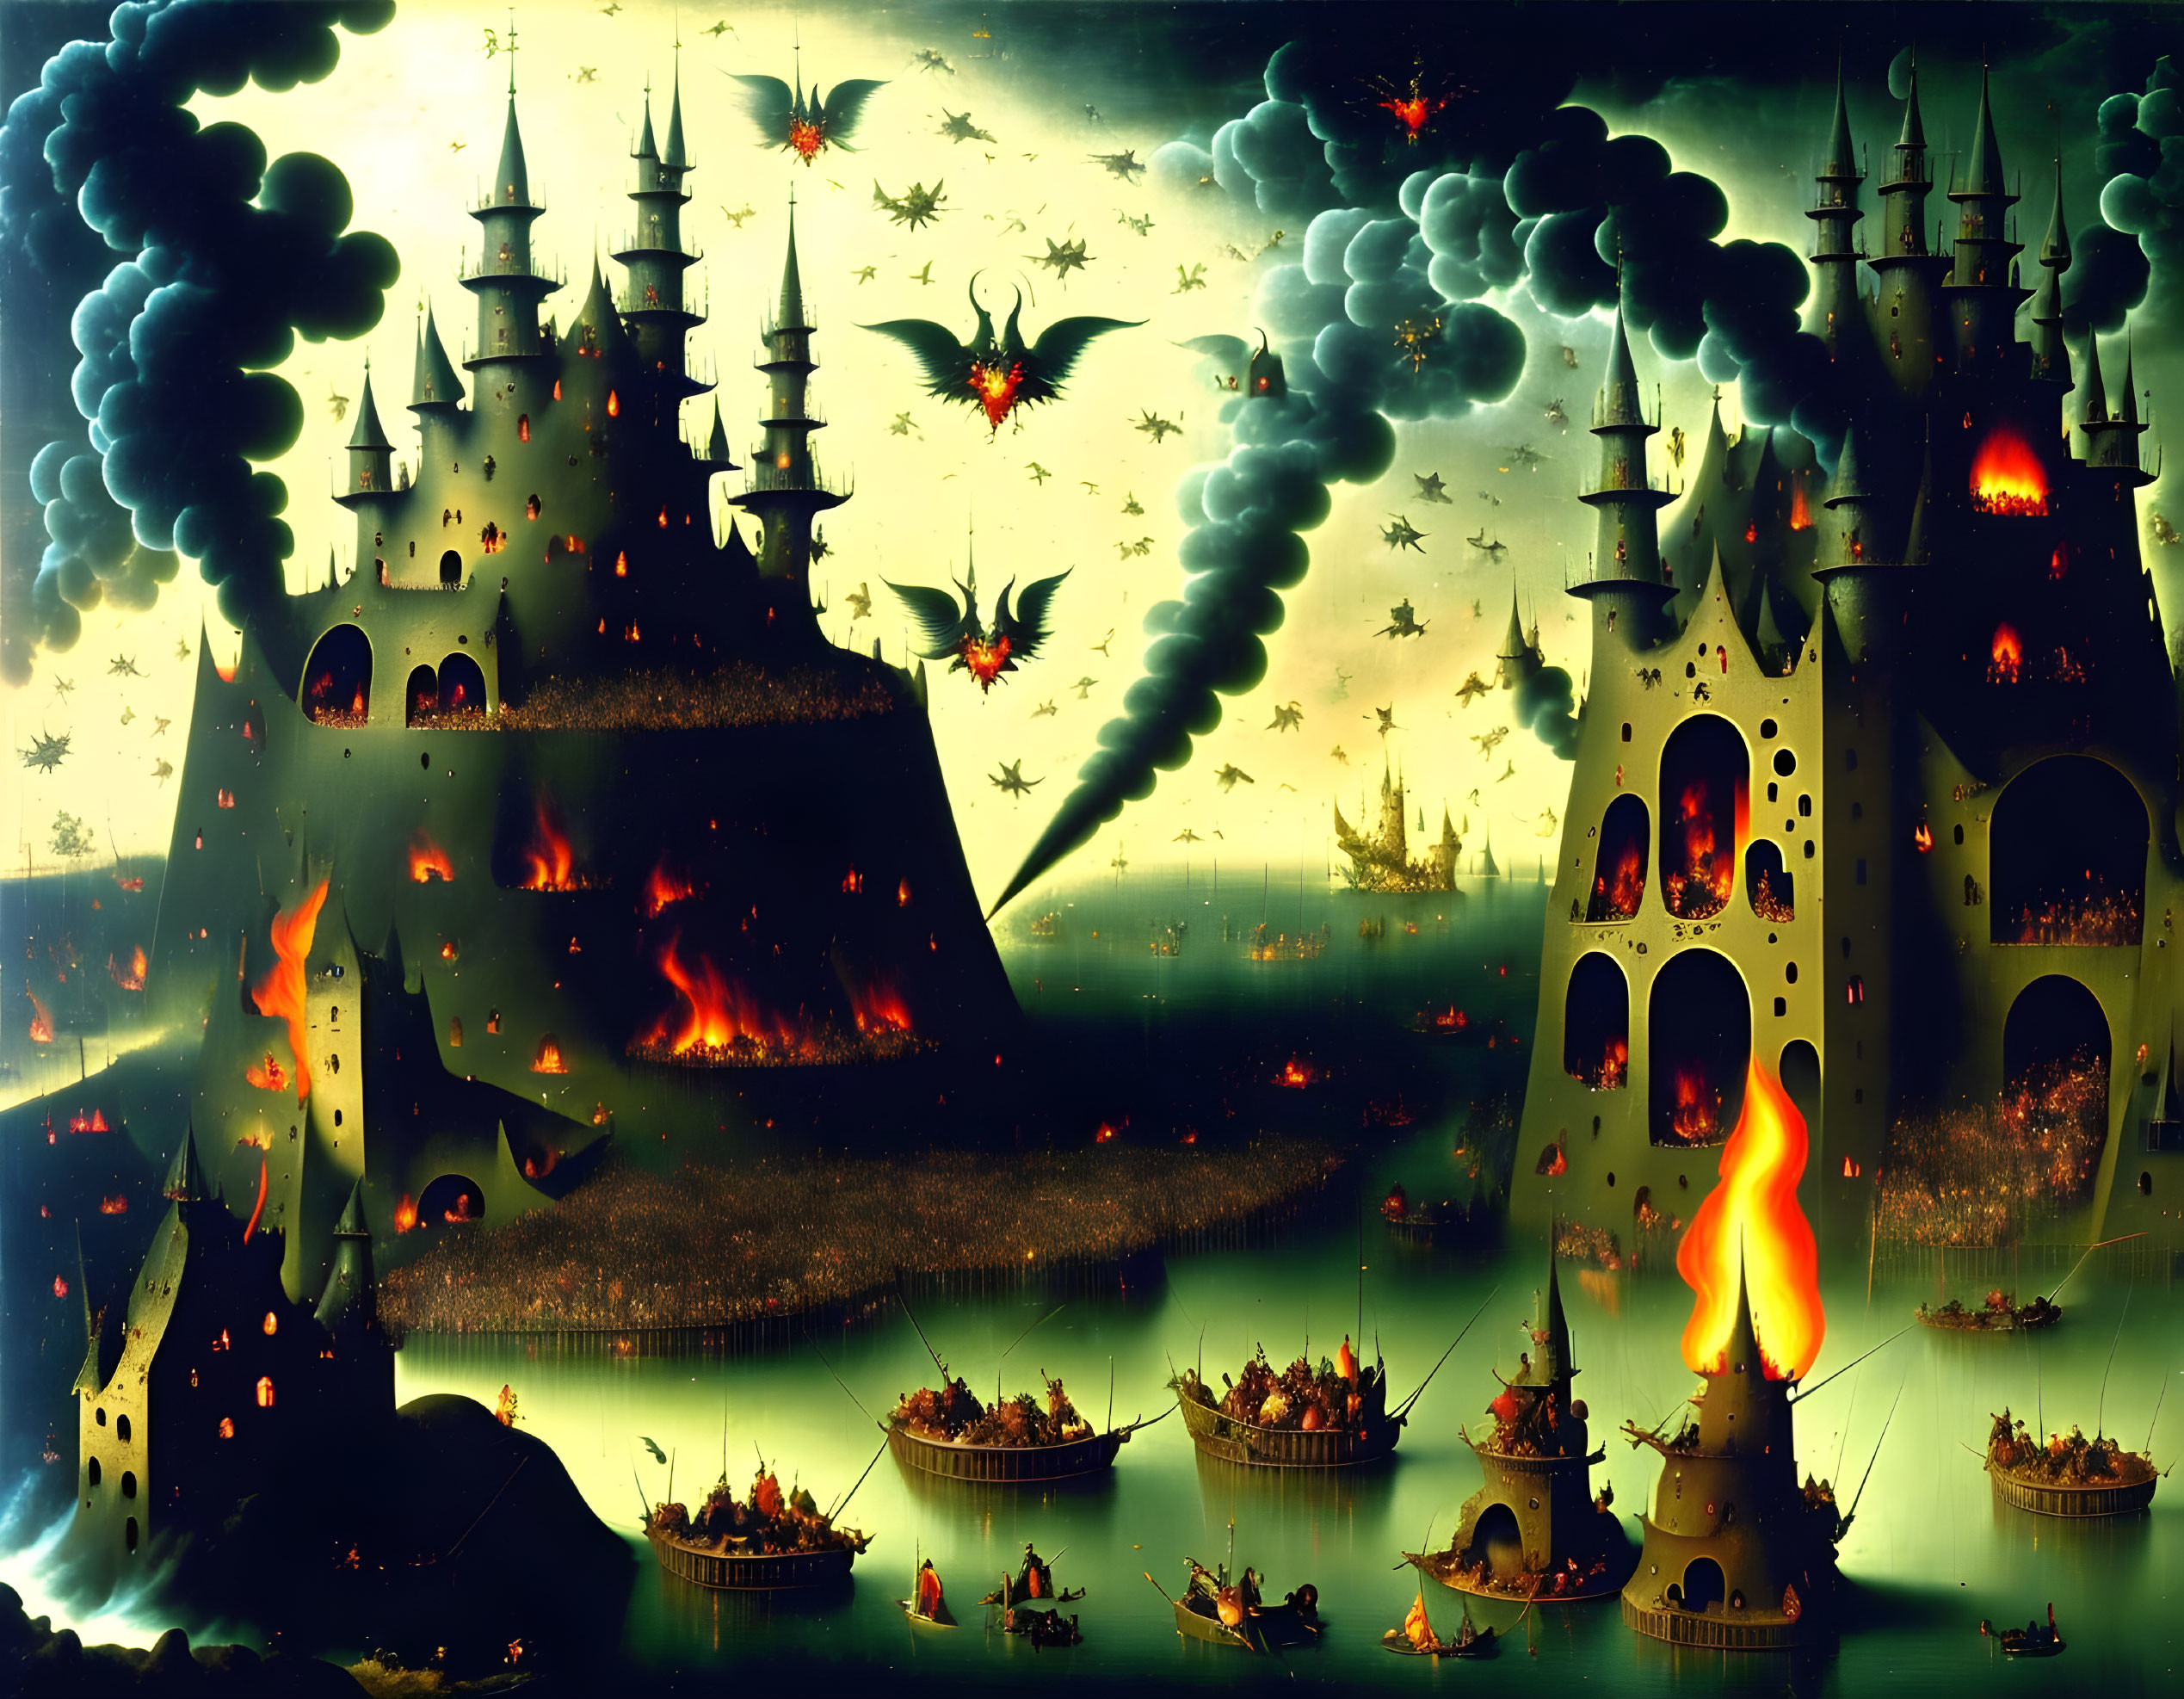 Dark fantasy painting: burning castles, fiery ships, and dragons in smoky skies